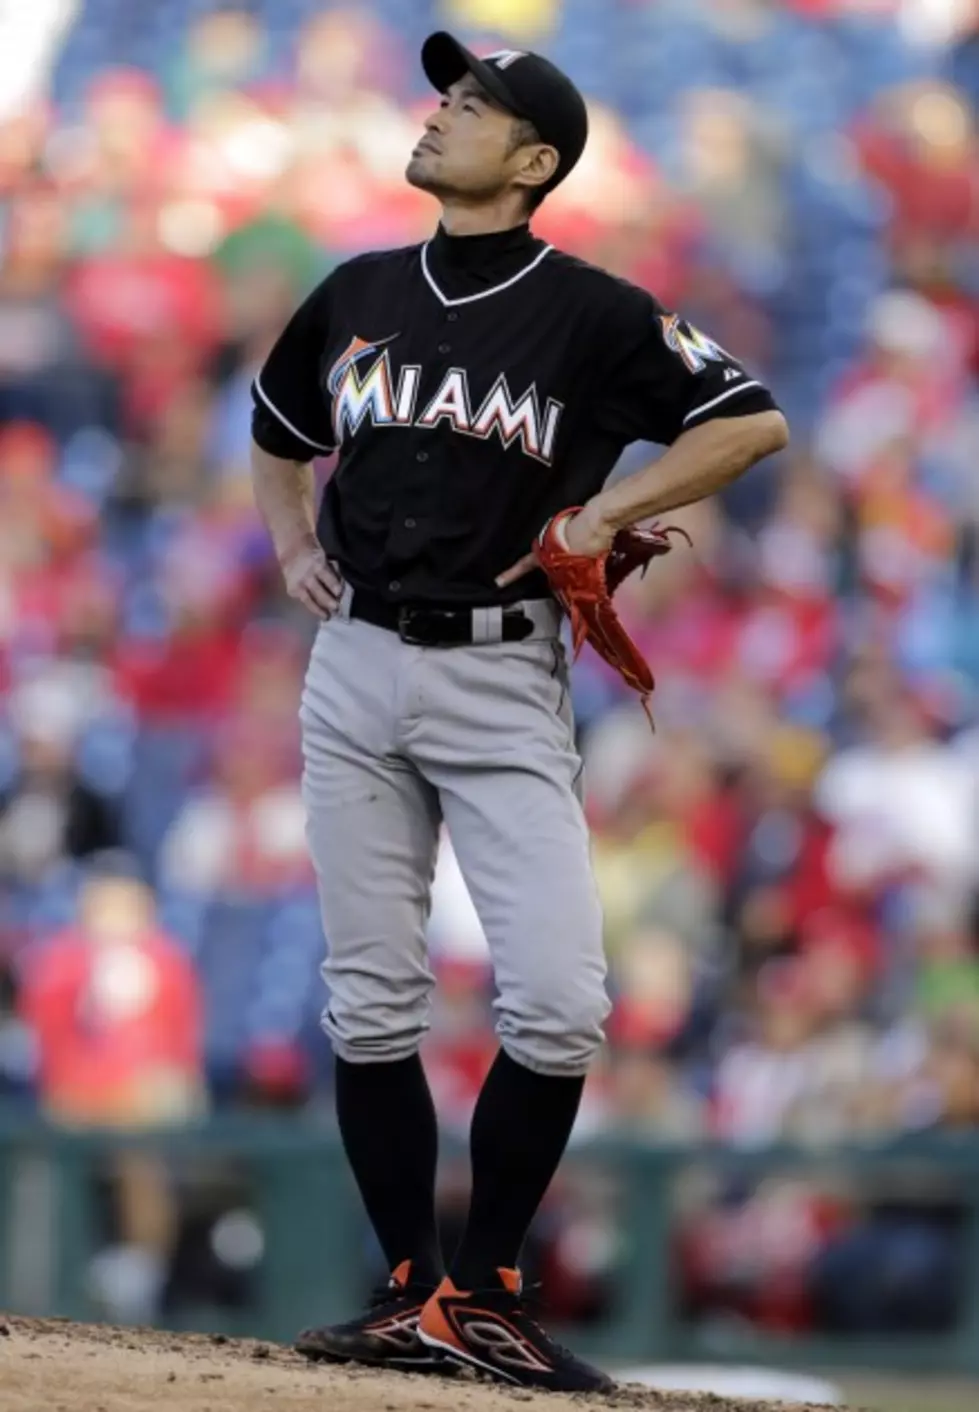 Marlins Sends in Ichiro to Pitch in Relief